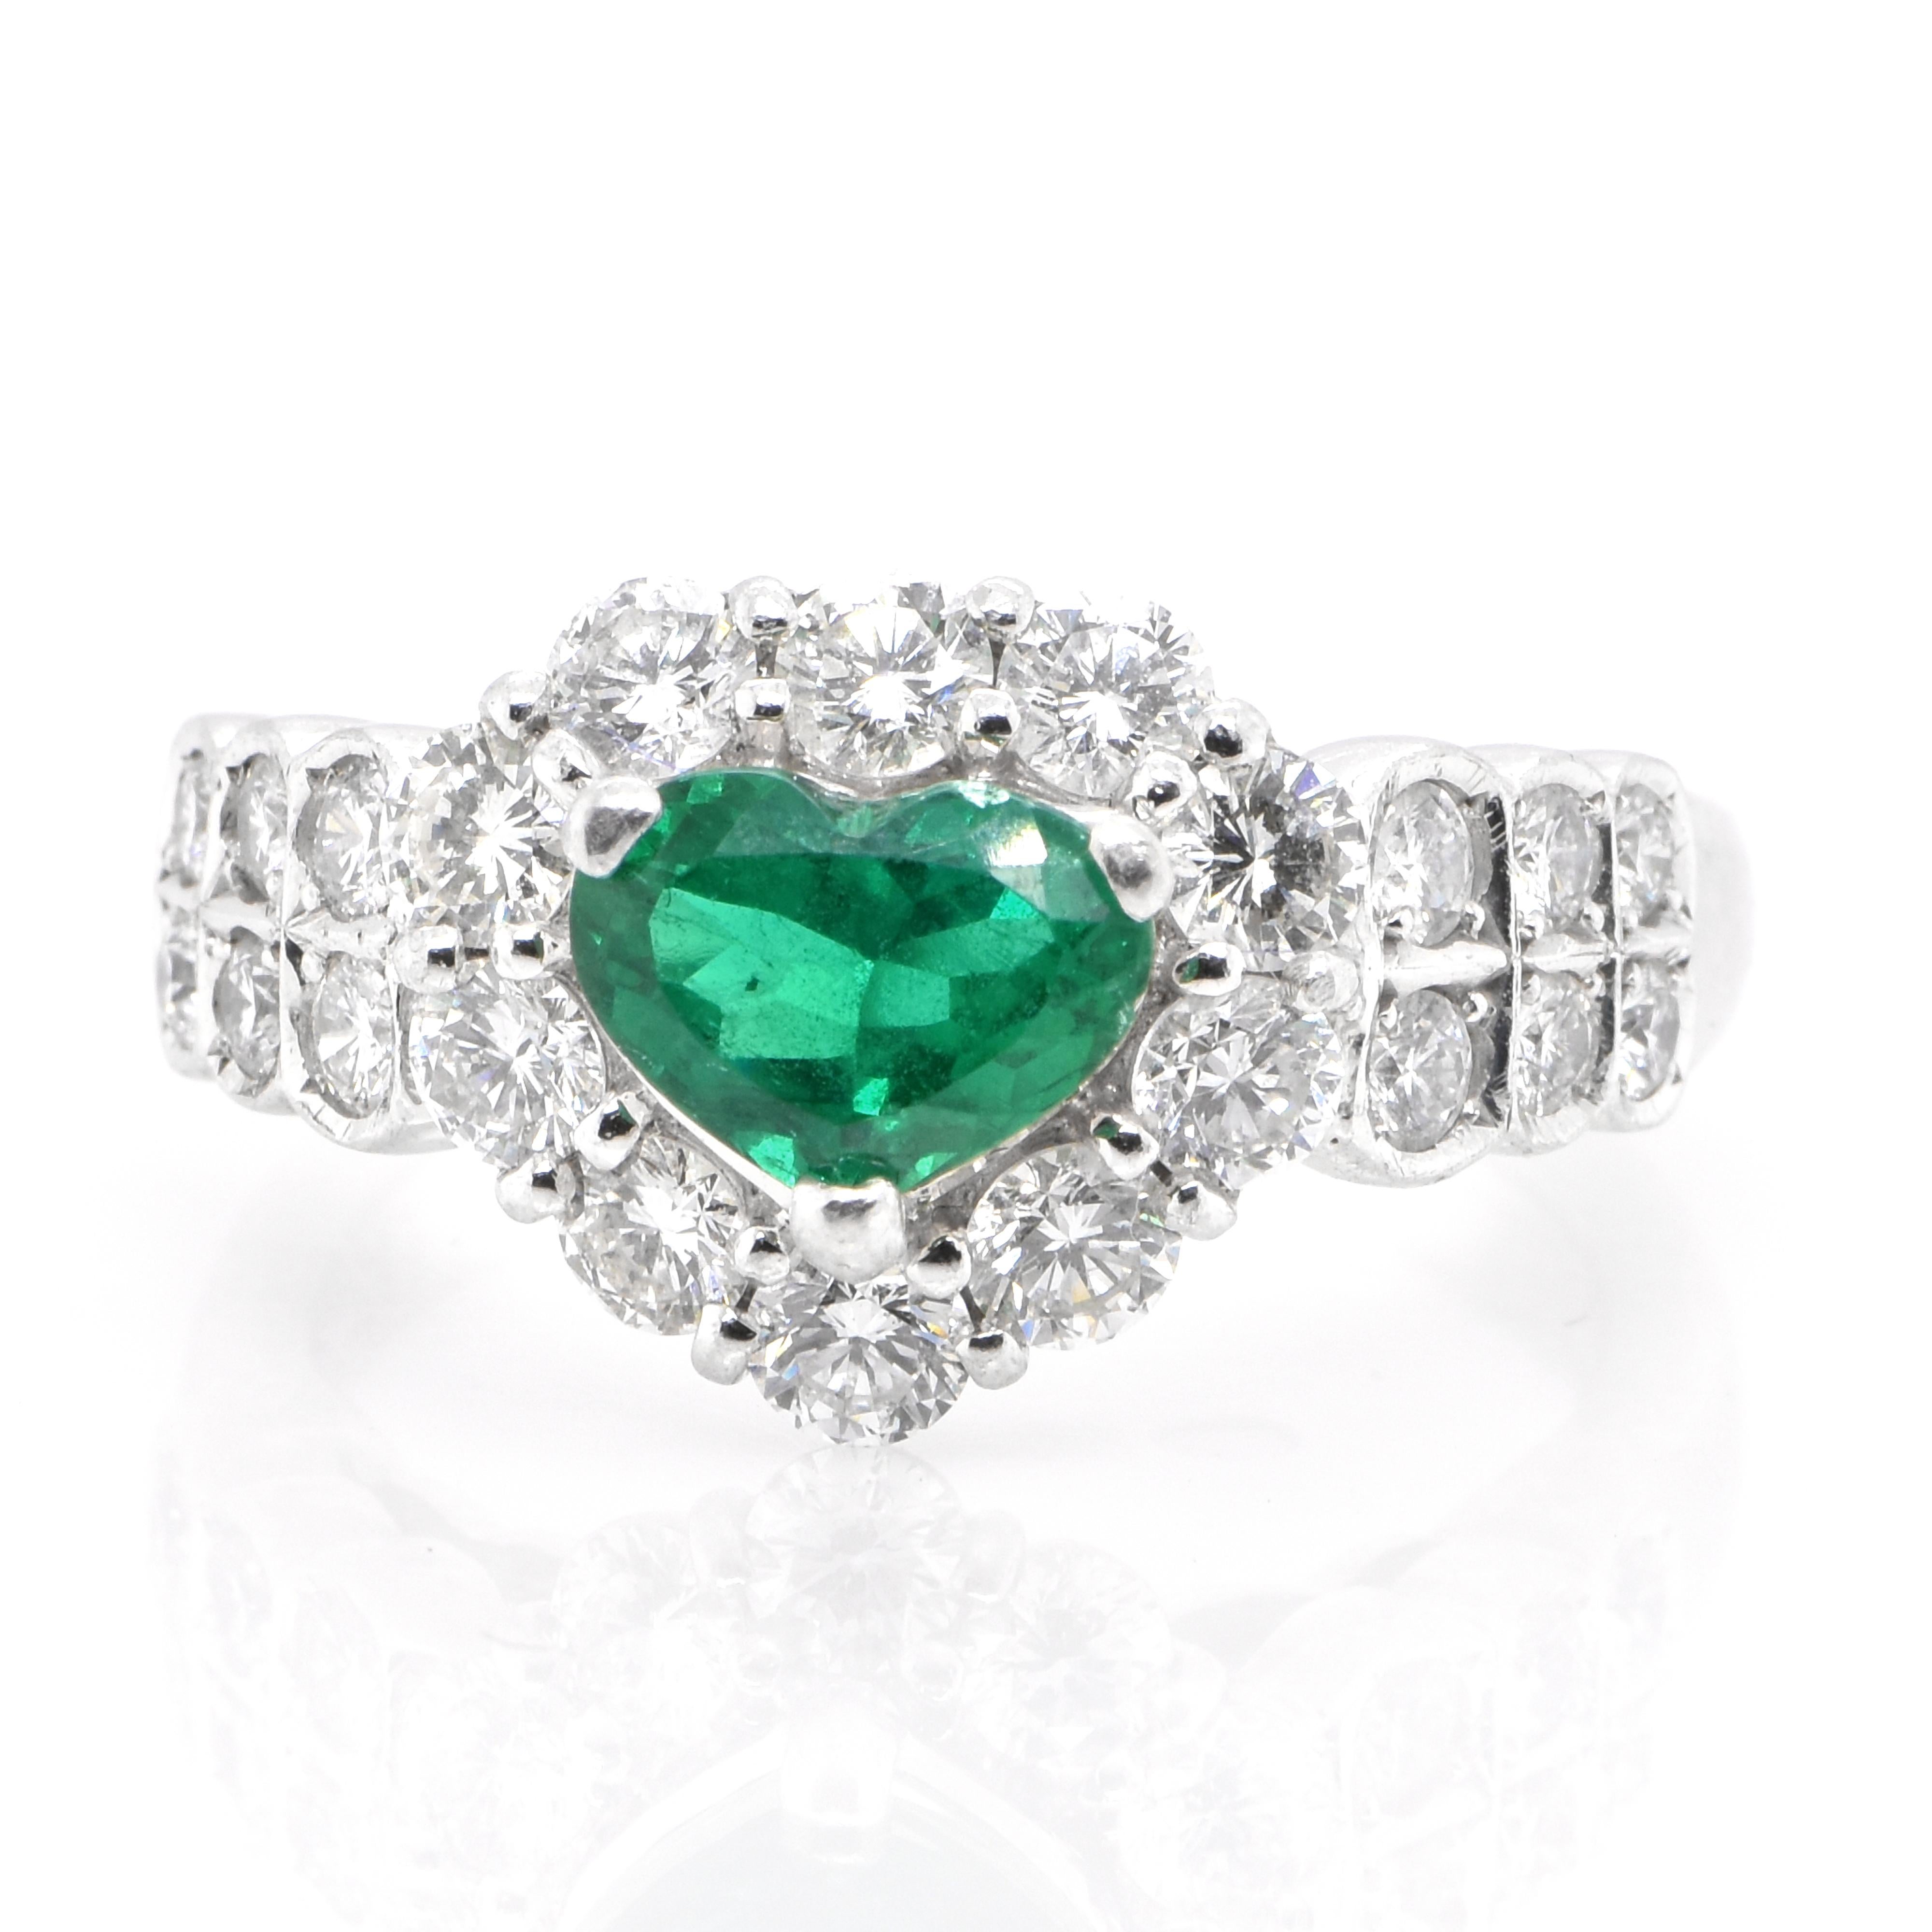 A stunning ring featuring a 0.85 Carat Natural Emerald and 1.23 Carats of Diamond Accents set in Platinum. People have admired emerald’s green for thousands of years. Emeralds have always been associated with the lushest landscapes and the richest